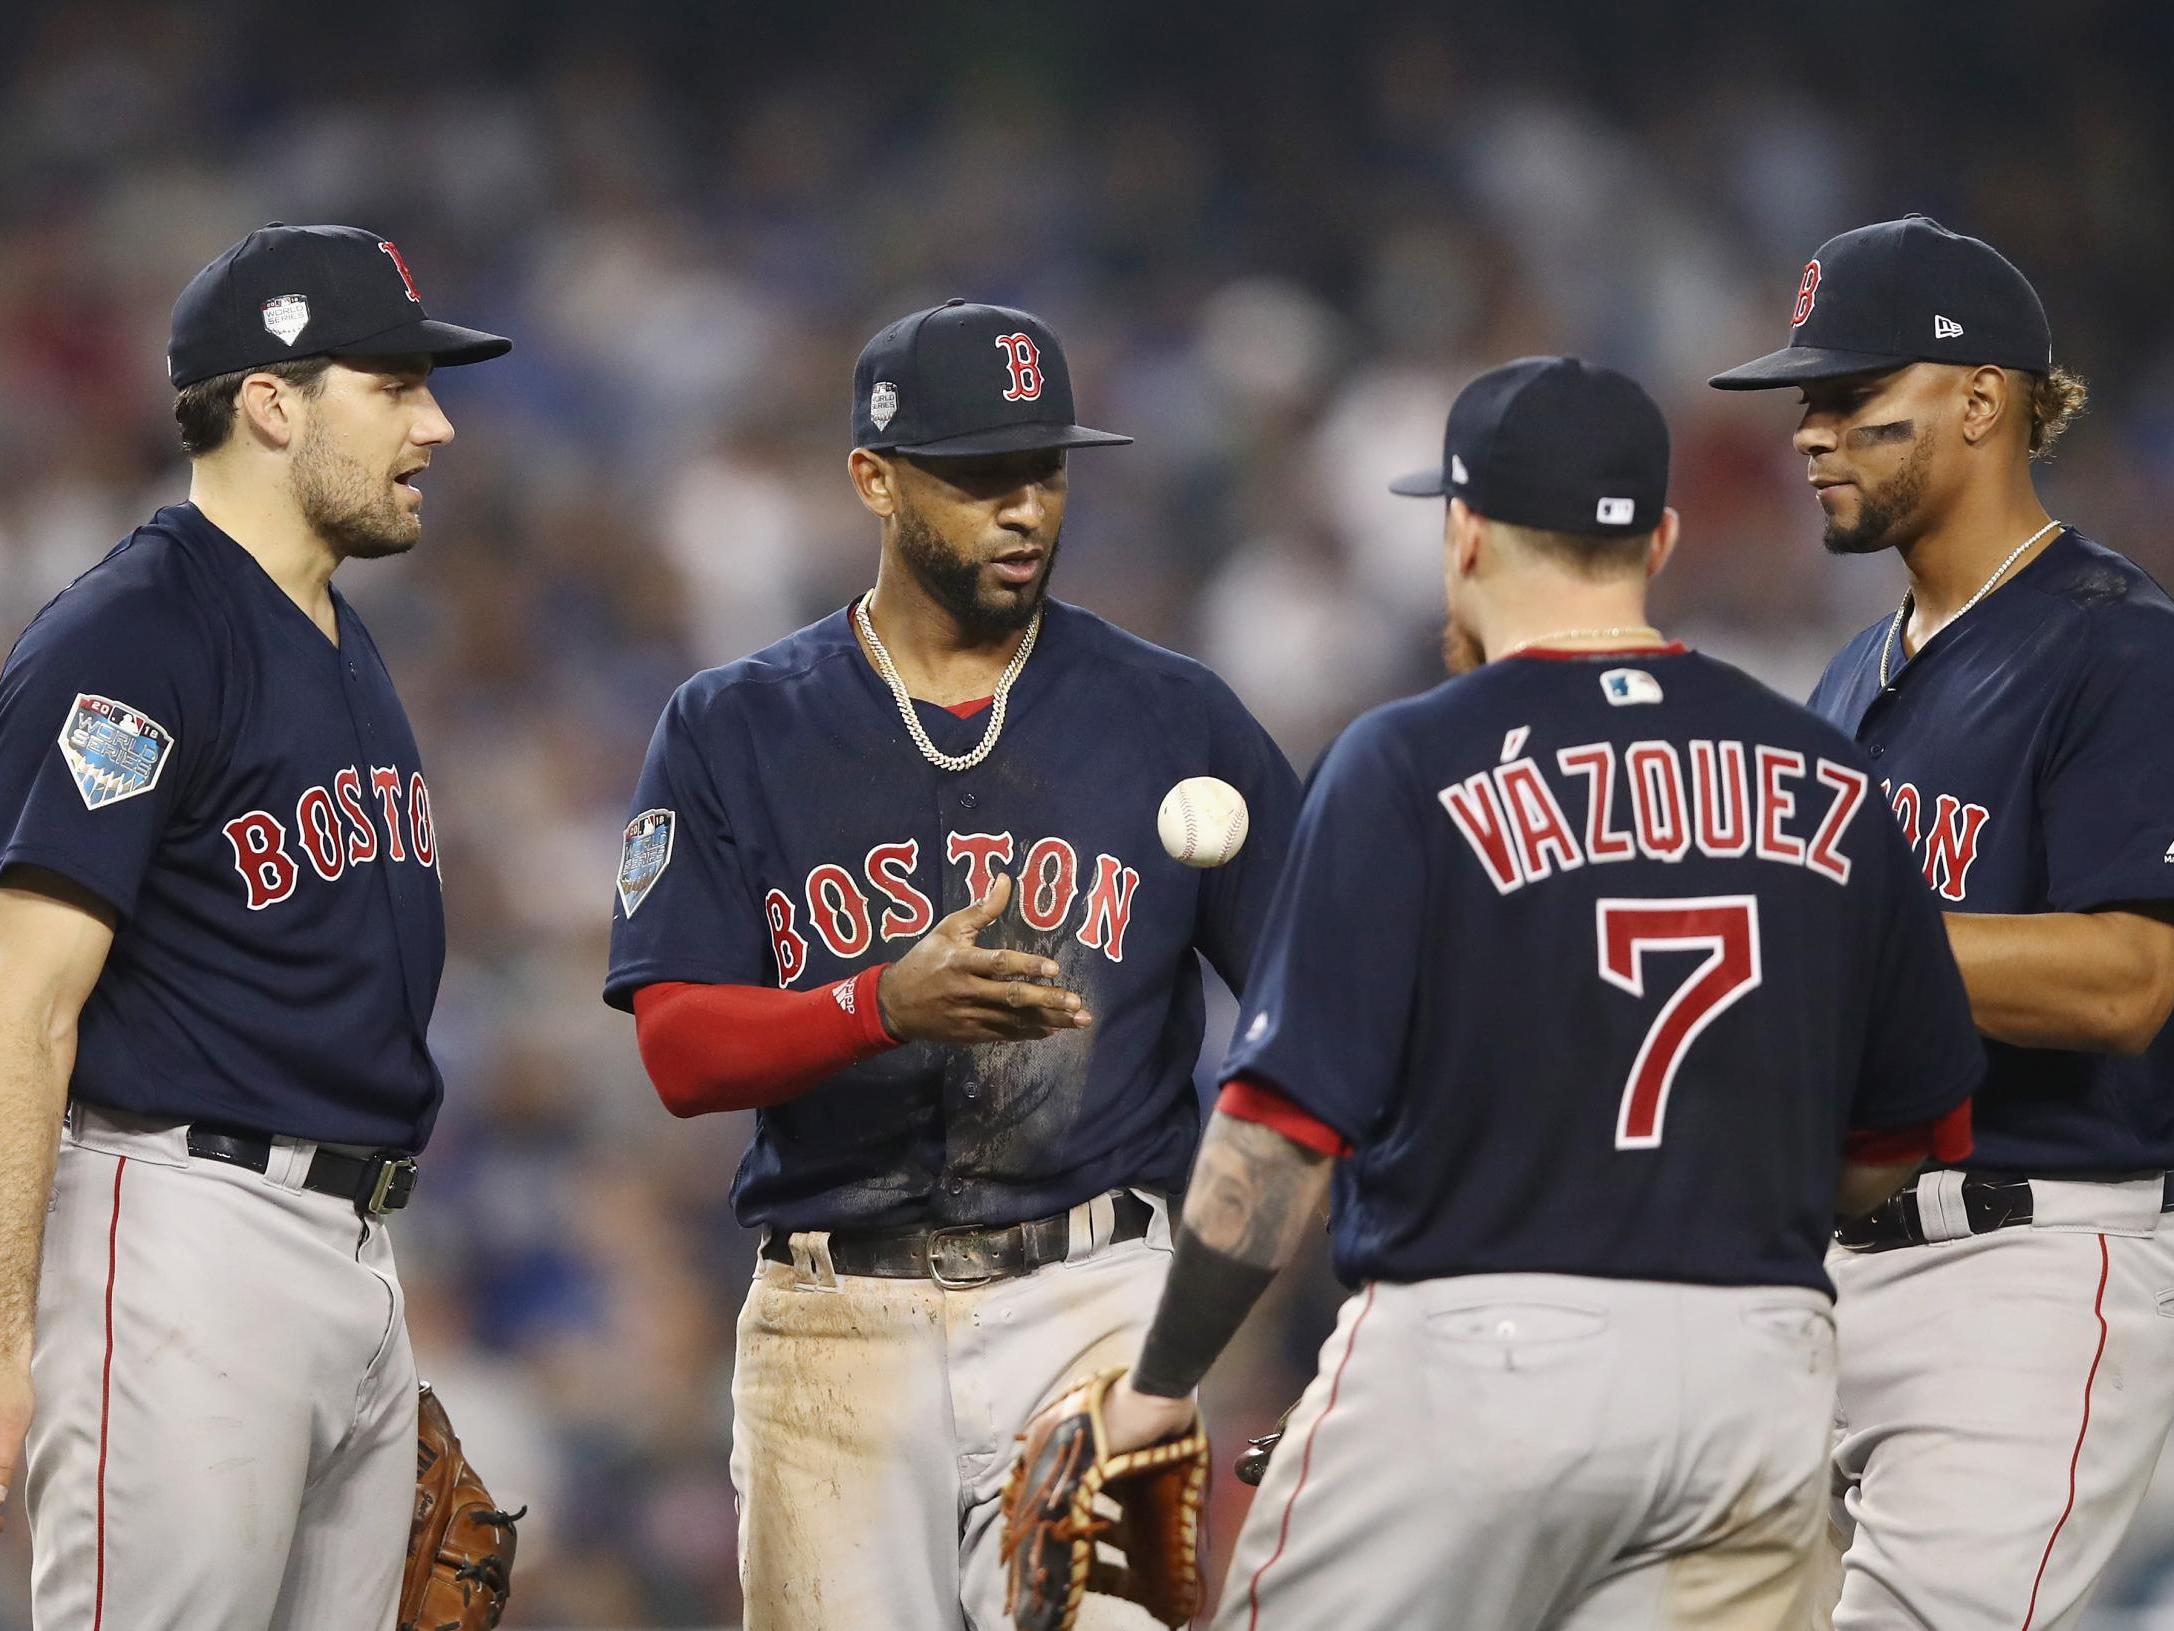 Eduardo Nunez is checked by his teammates after catching a fly ball during the sixth inning